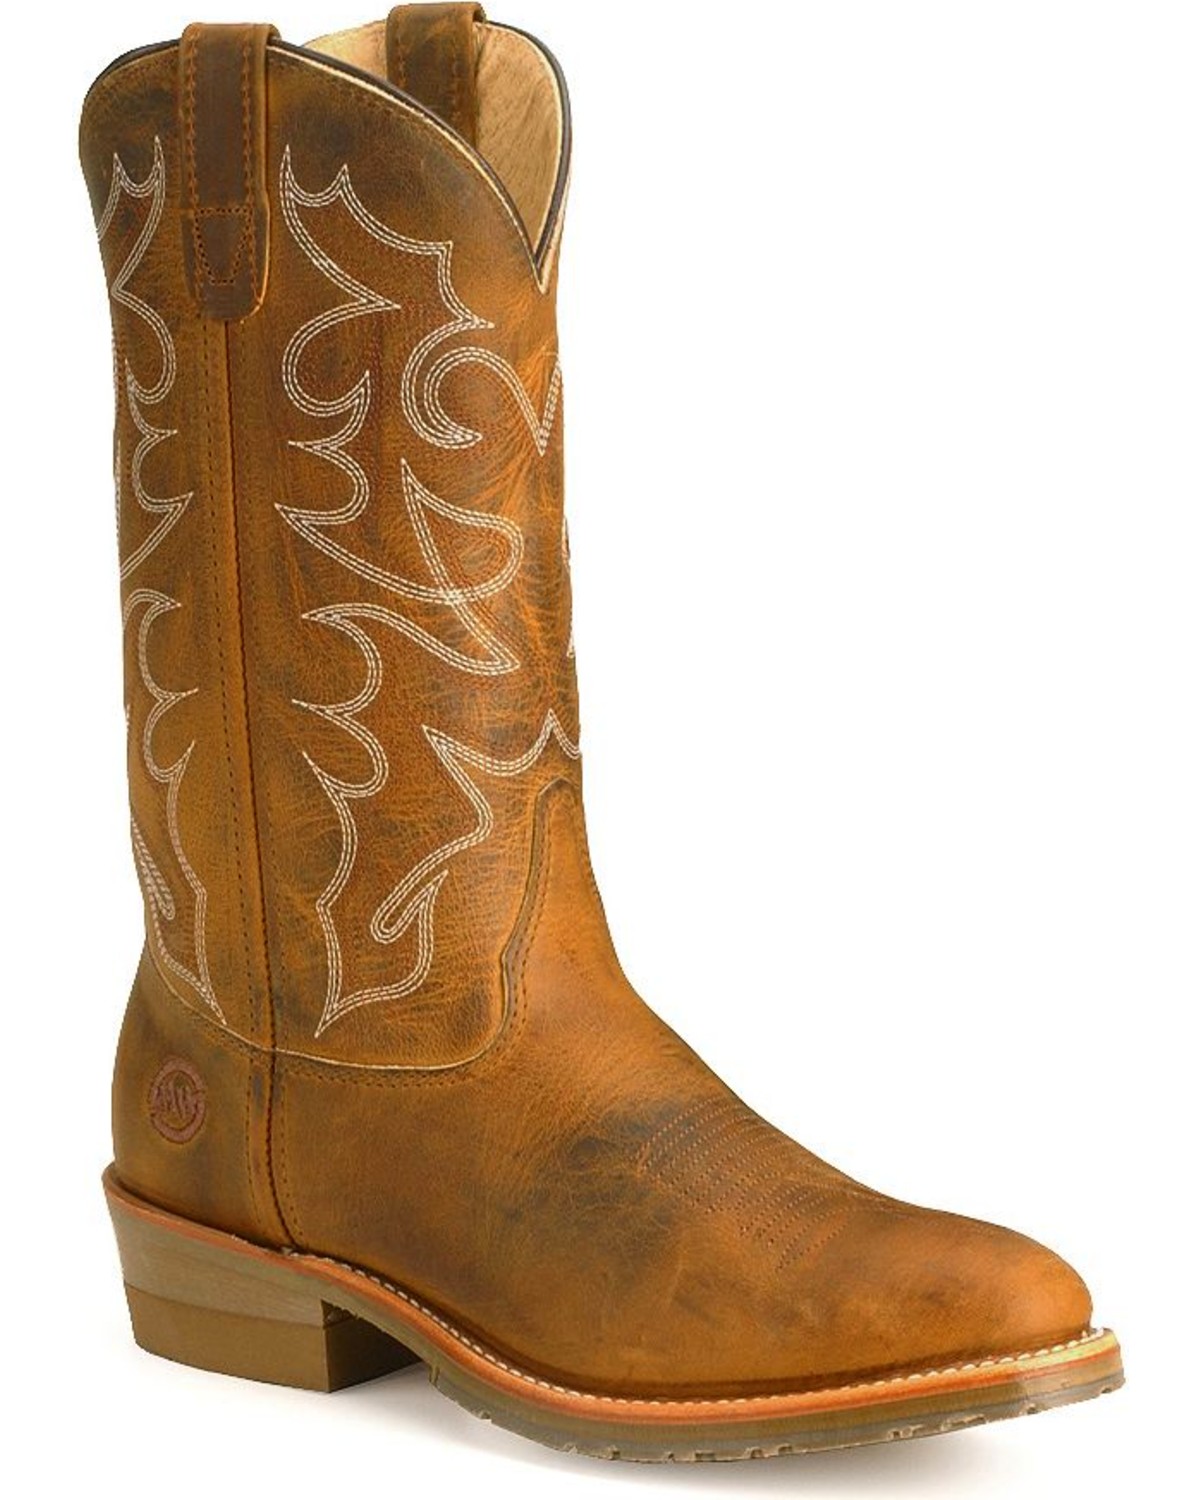 Folklore Western Work Boots | Boot Barn